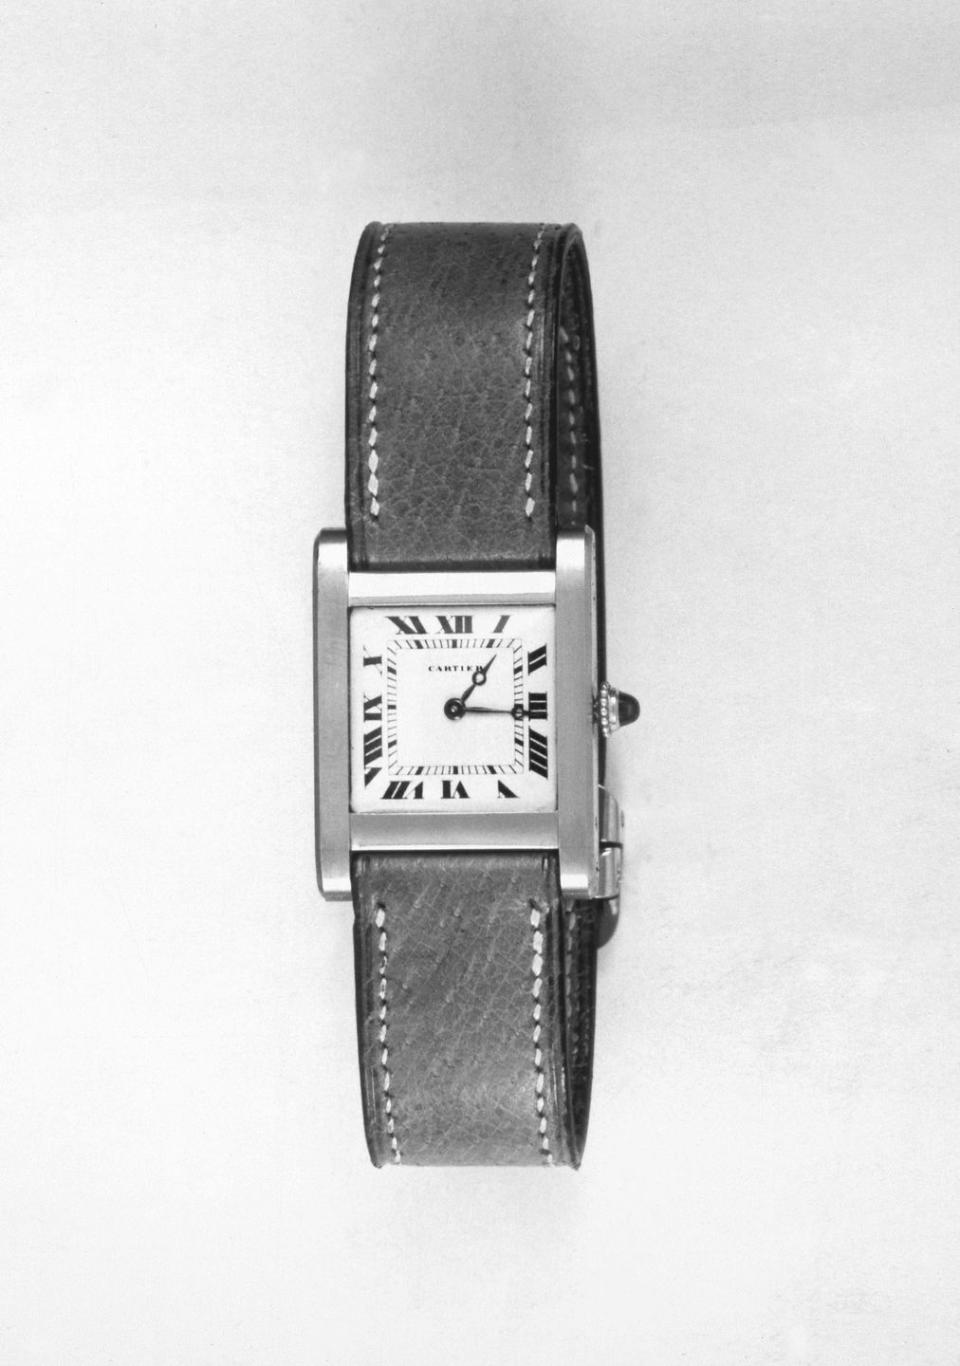 1) The watch was invented by Louis Cartier in 1917.